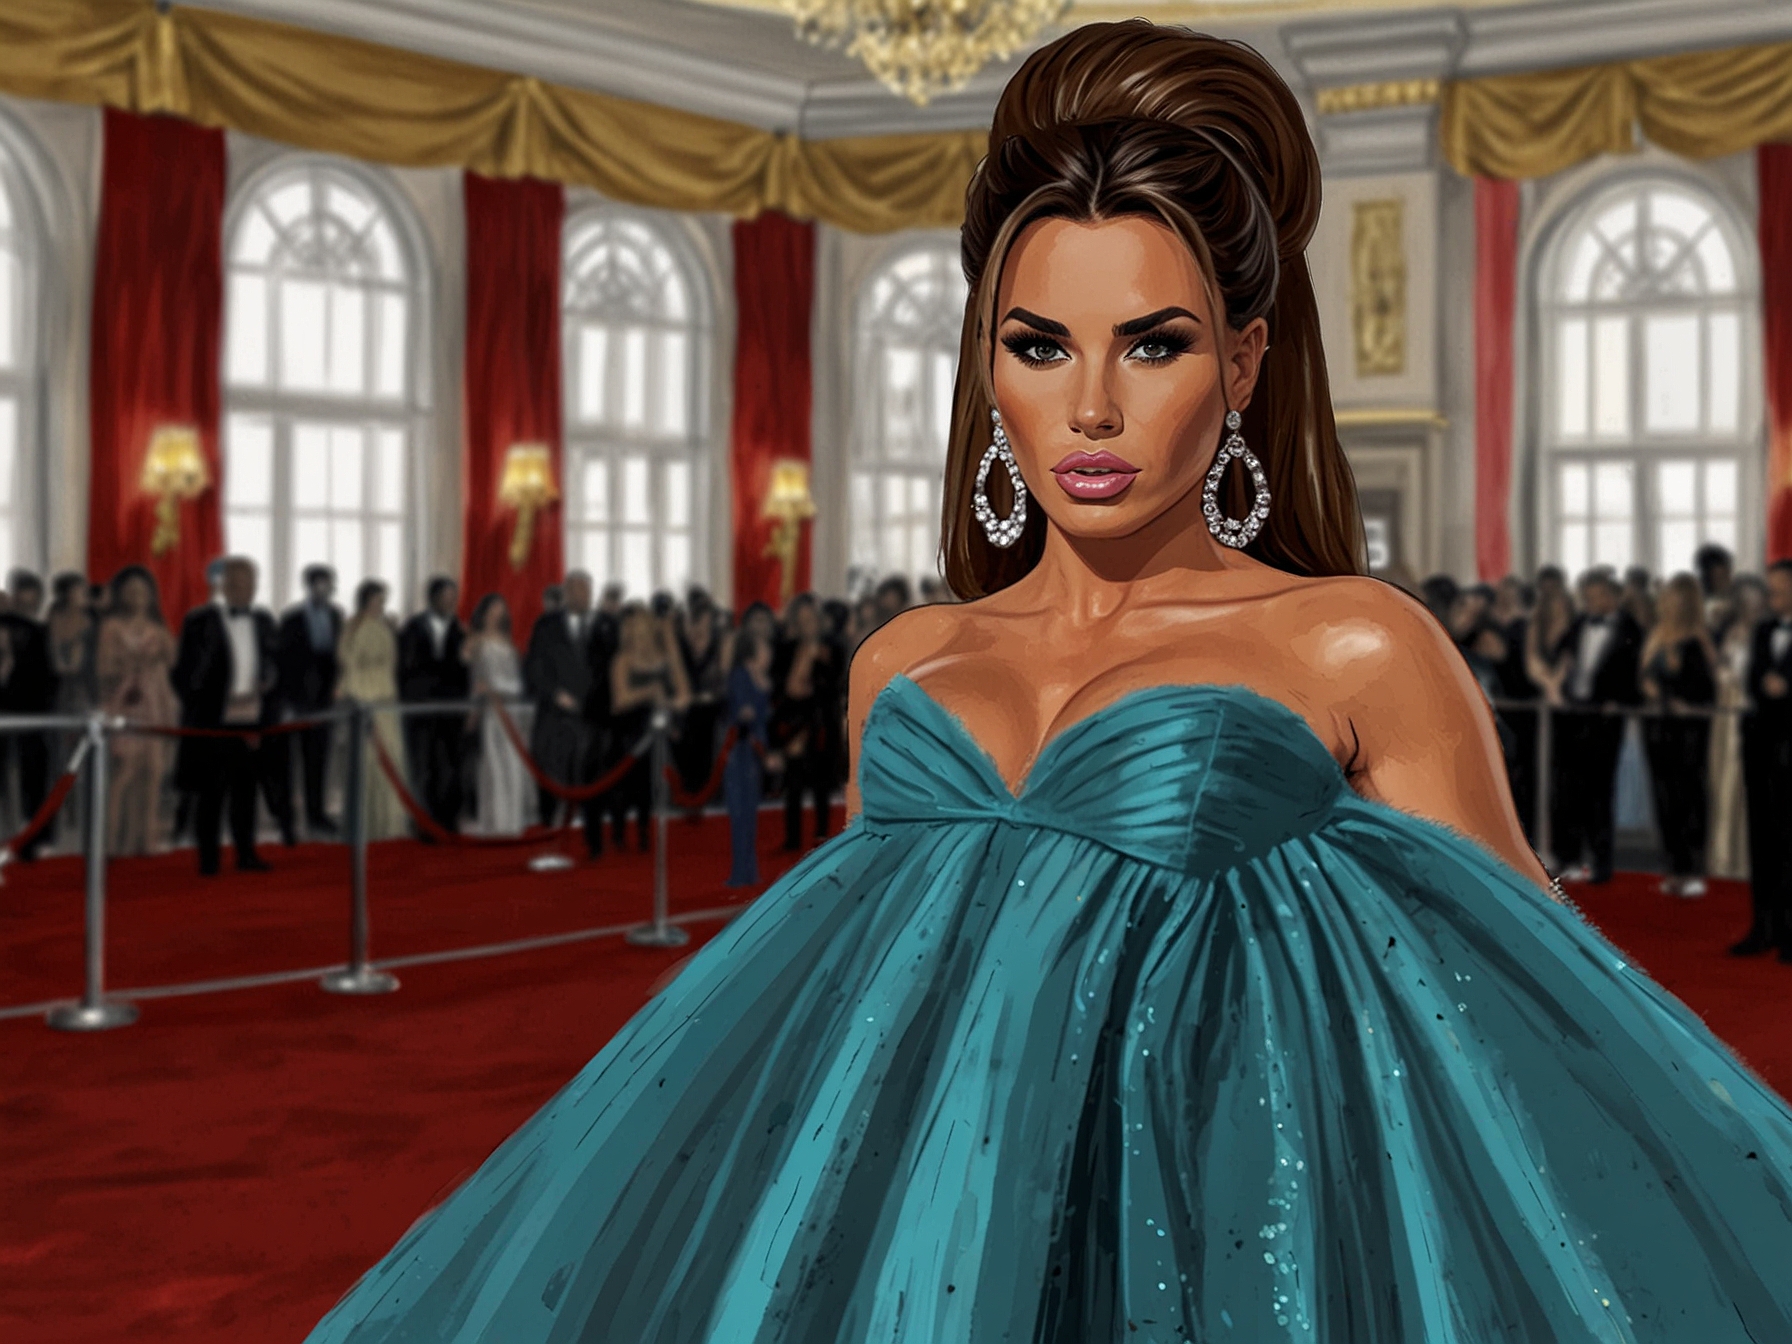 Katie Price walking the red carpet at a glamorous event, exuding confidence in a stunning outfit.